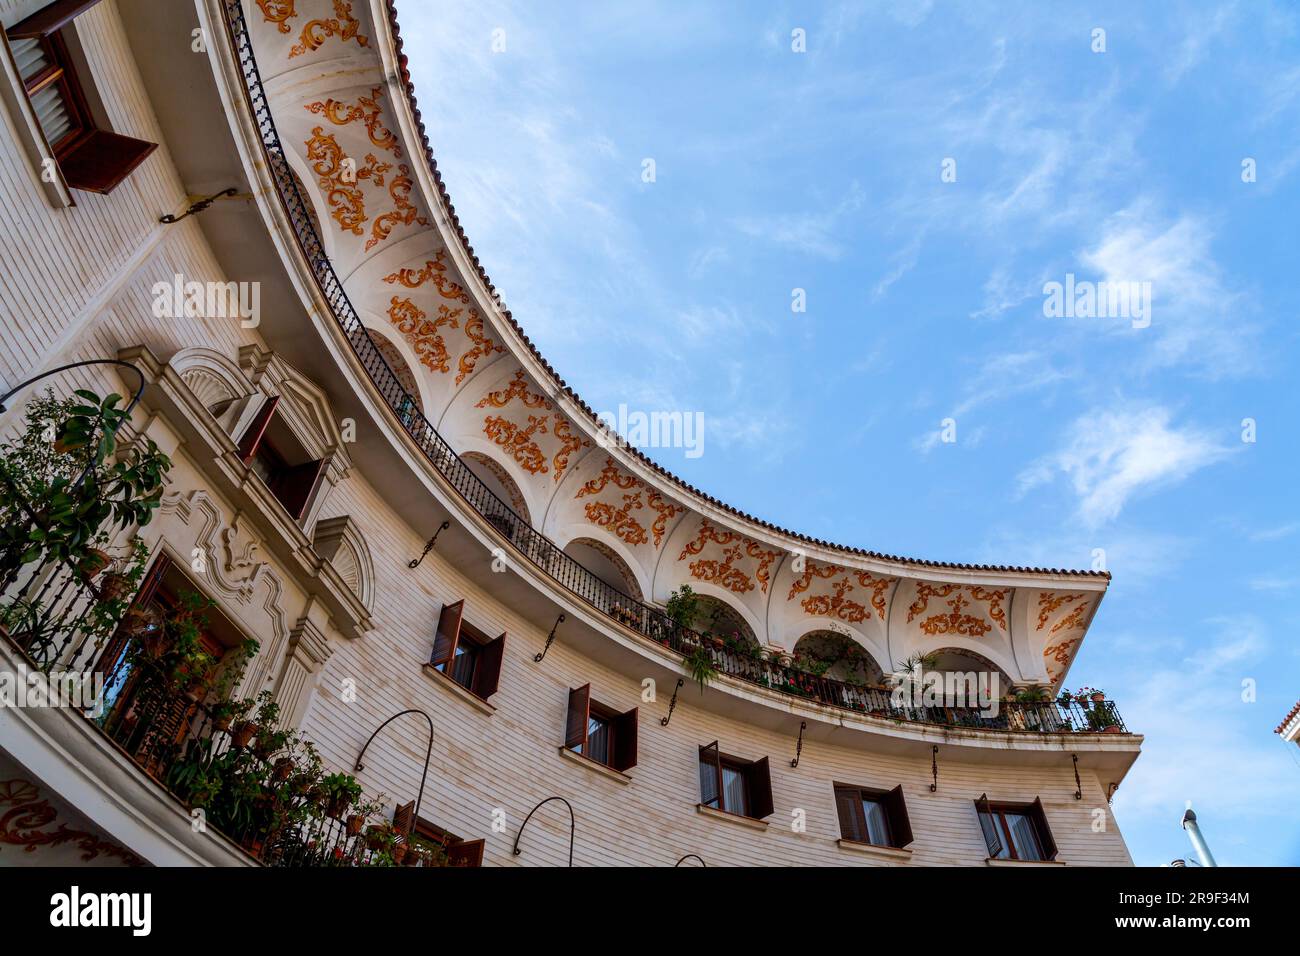 The Plaza del Cabildo is located in the Arenal neighborhood, in the Casco Antiguo district of the Spanish city of Seville. Stock Photo